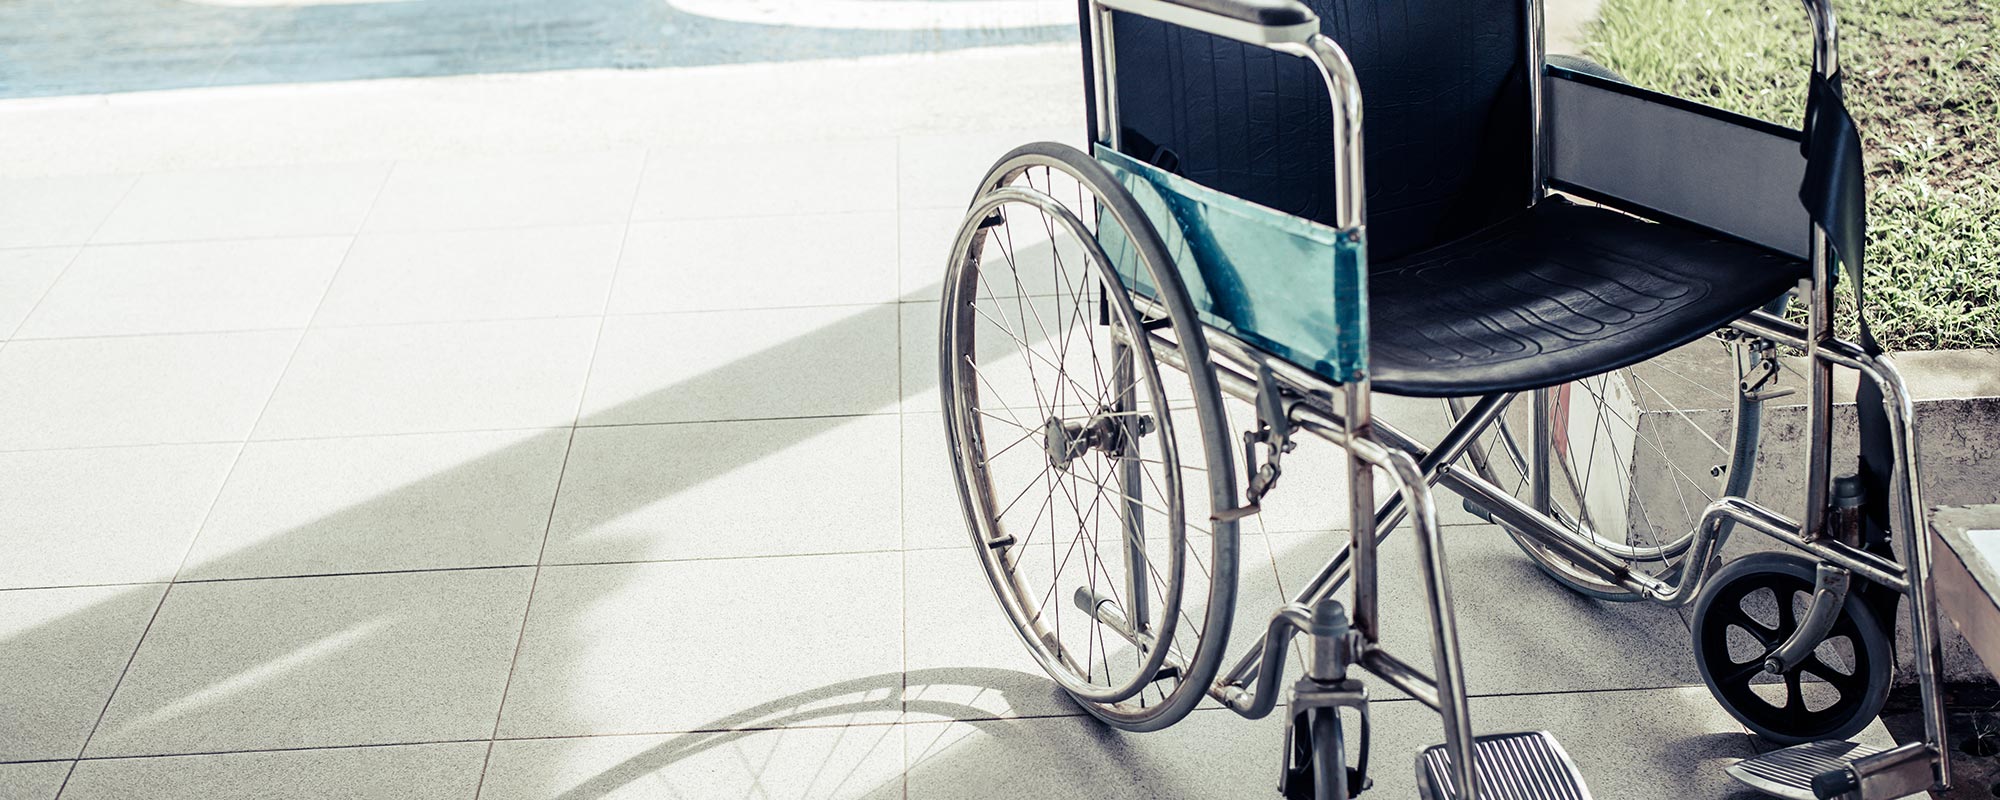 Being in a wheelchair is no reason for being held in solitary